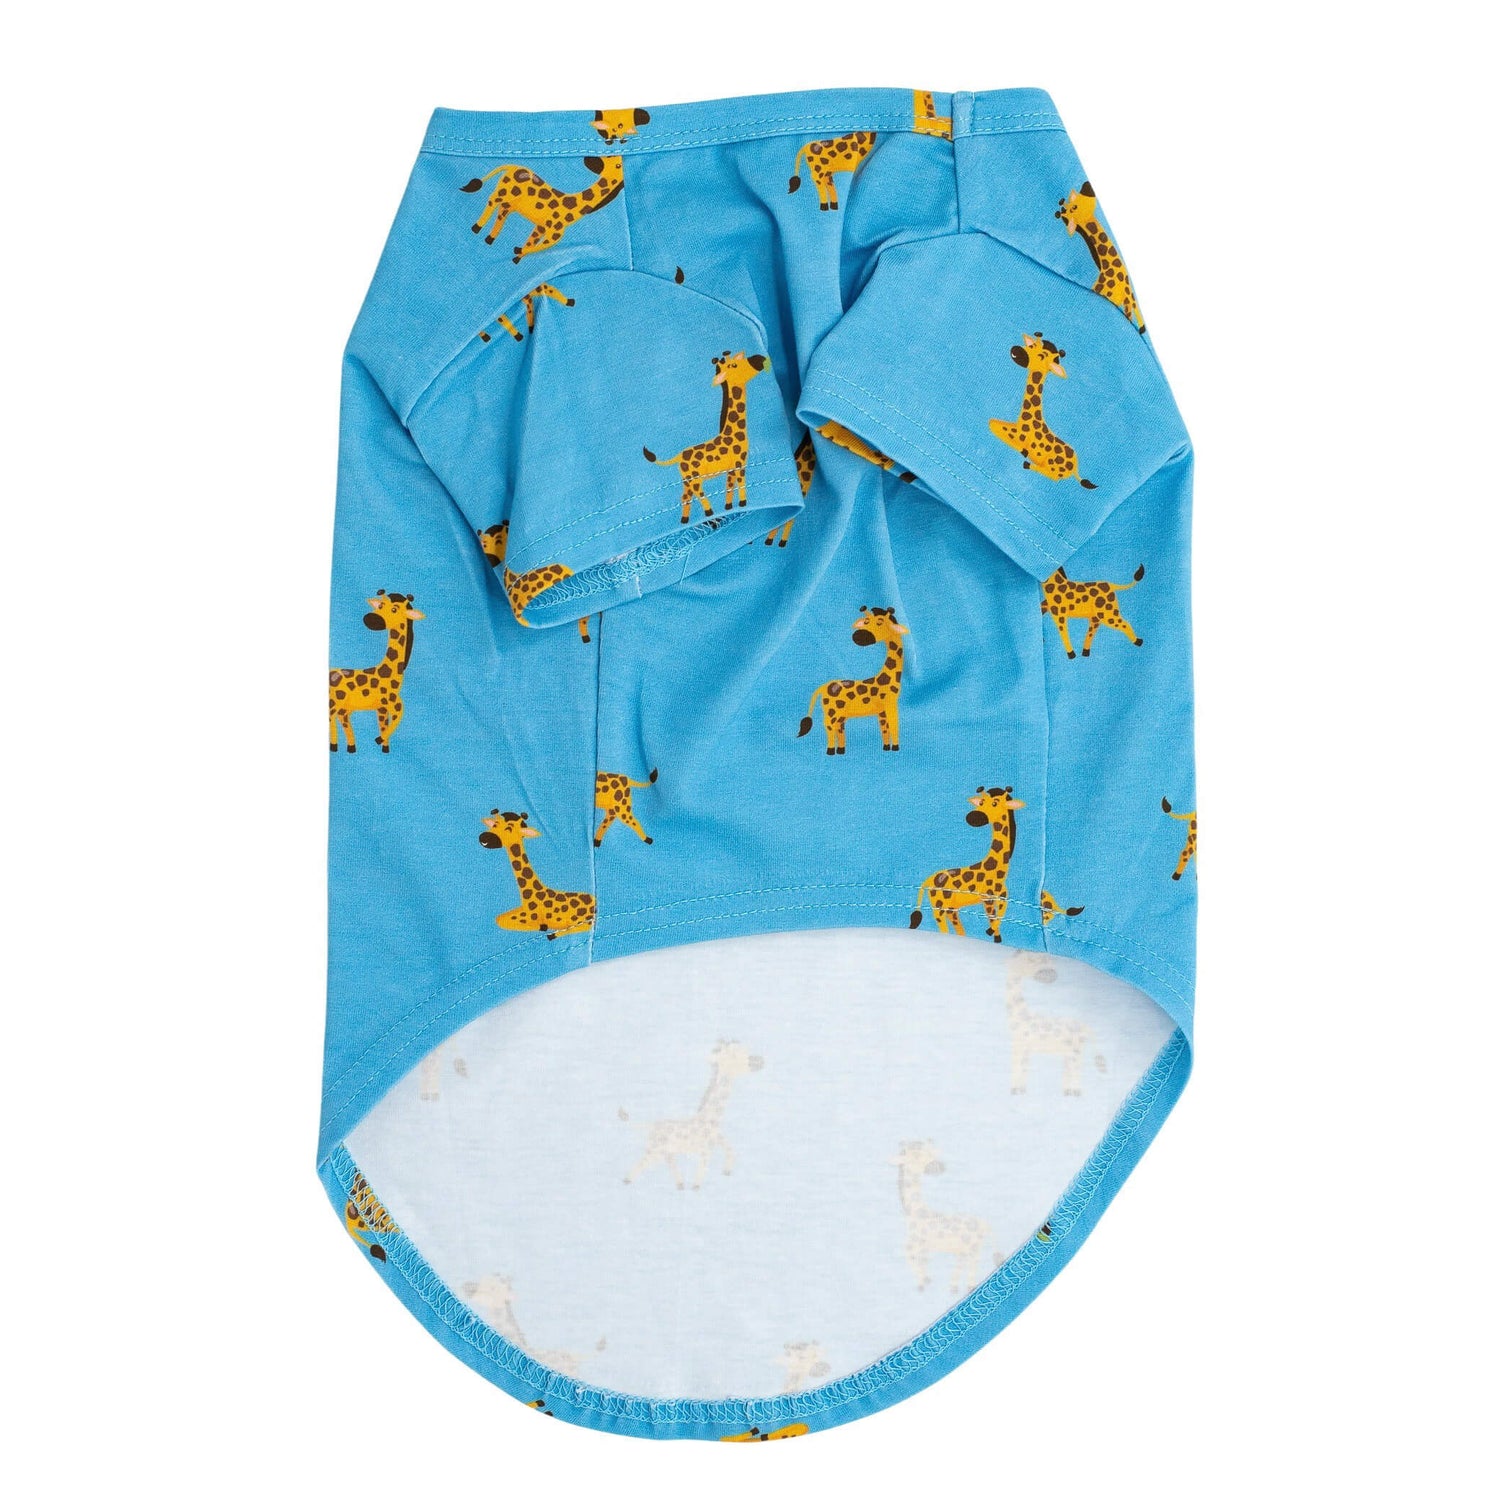 Front flat lay showing Gerald the Giraffe dog pyjammas made by Vibrant Hound. They are blue with 3cm girraffes printed on them.